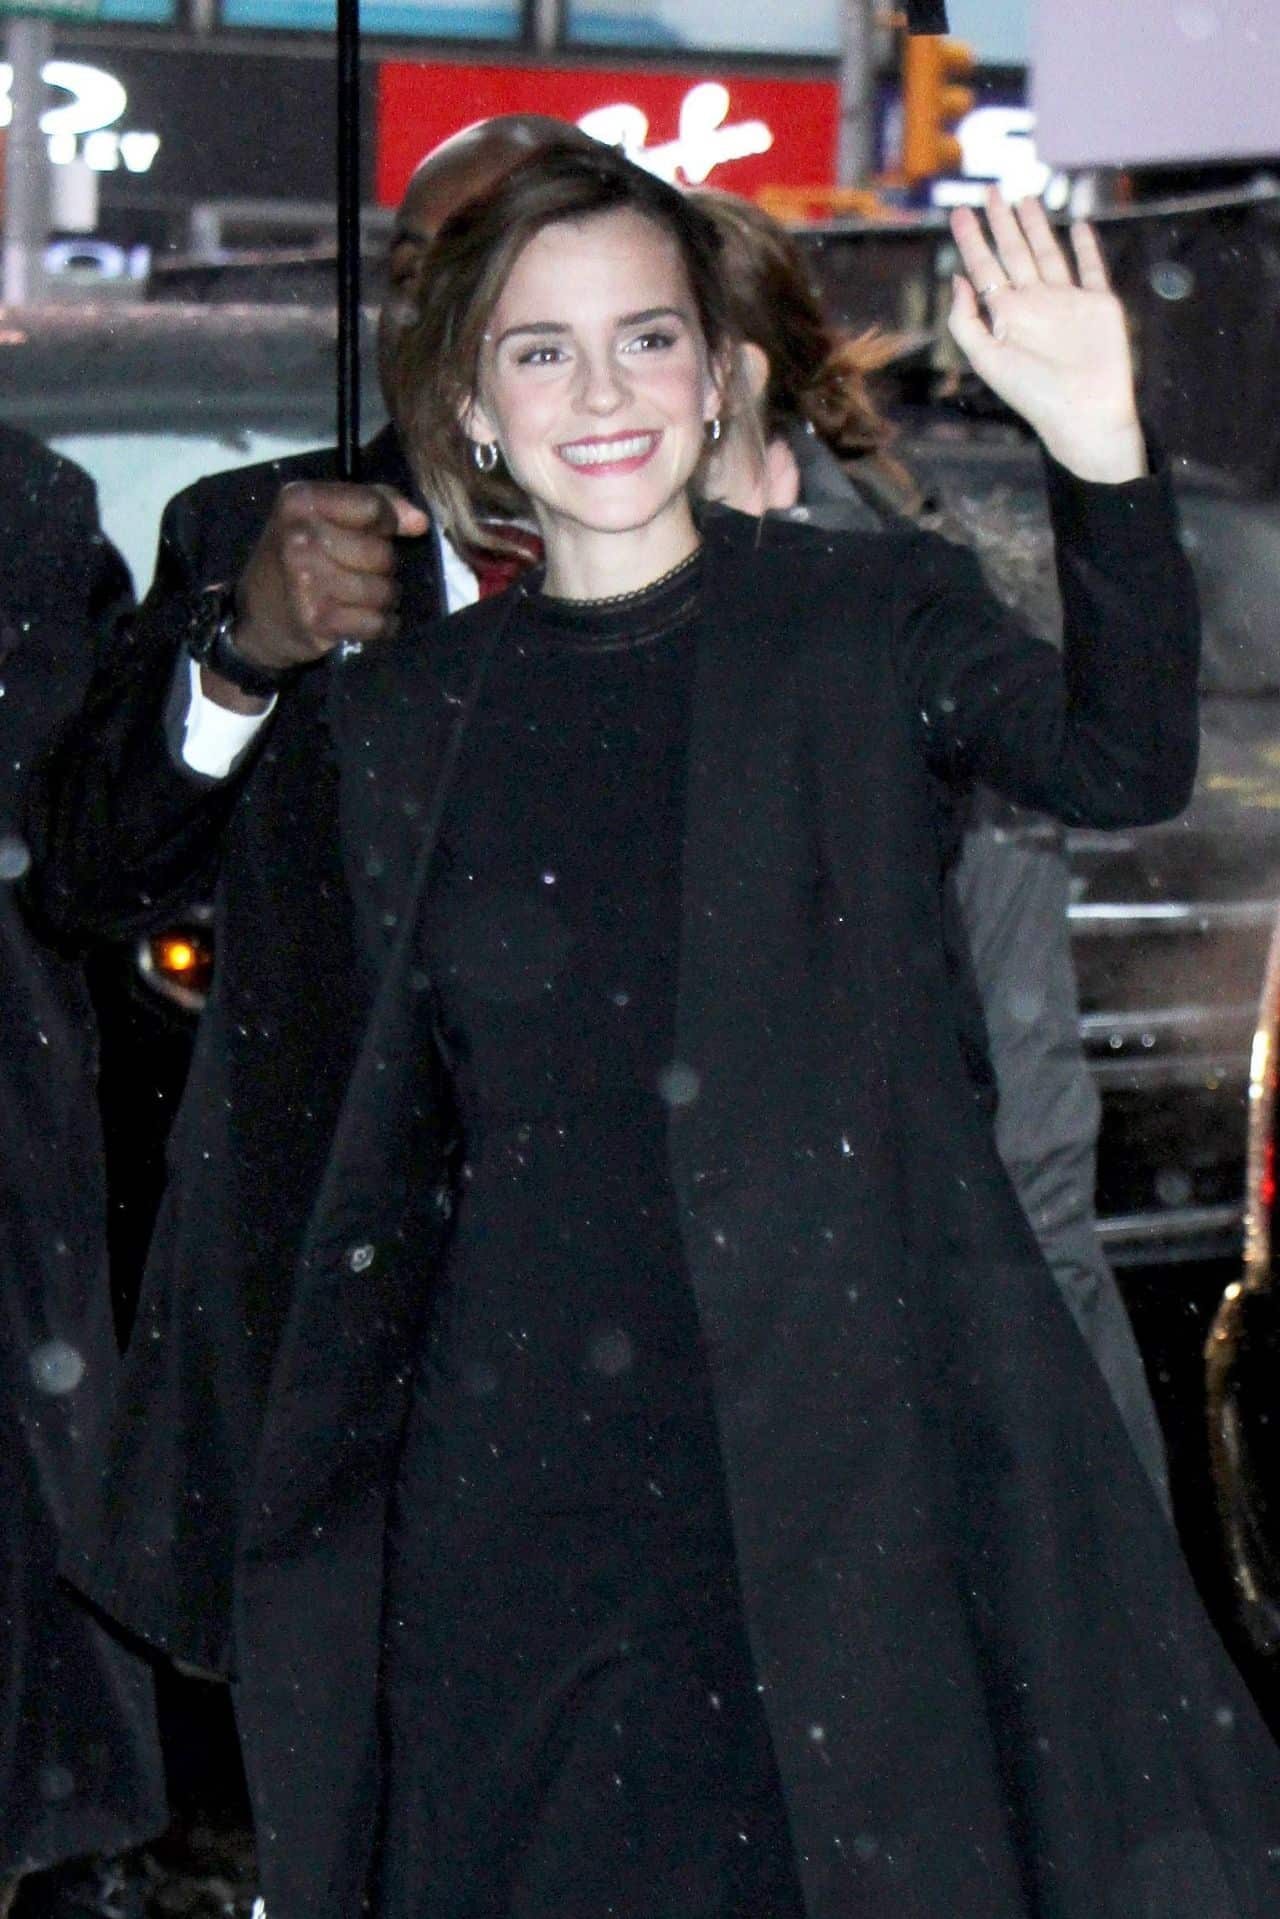 Emma Watson Arrives at "Good Morning America" TV Show in NYC